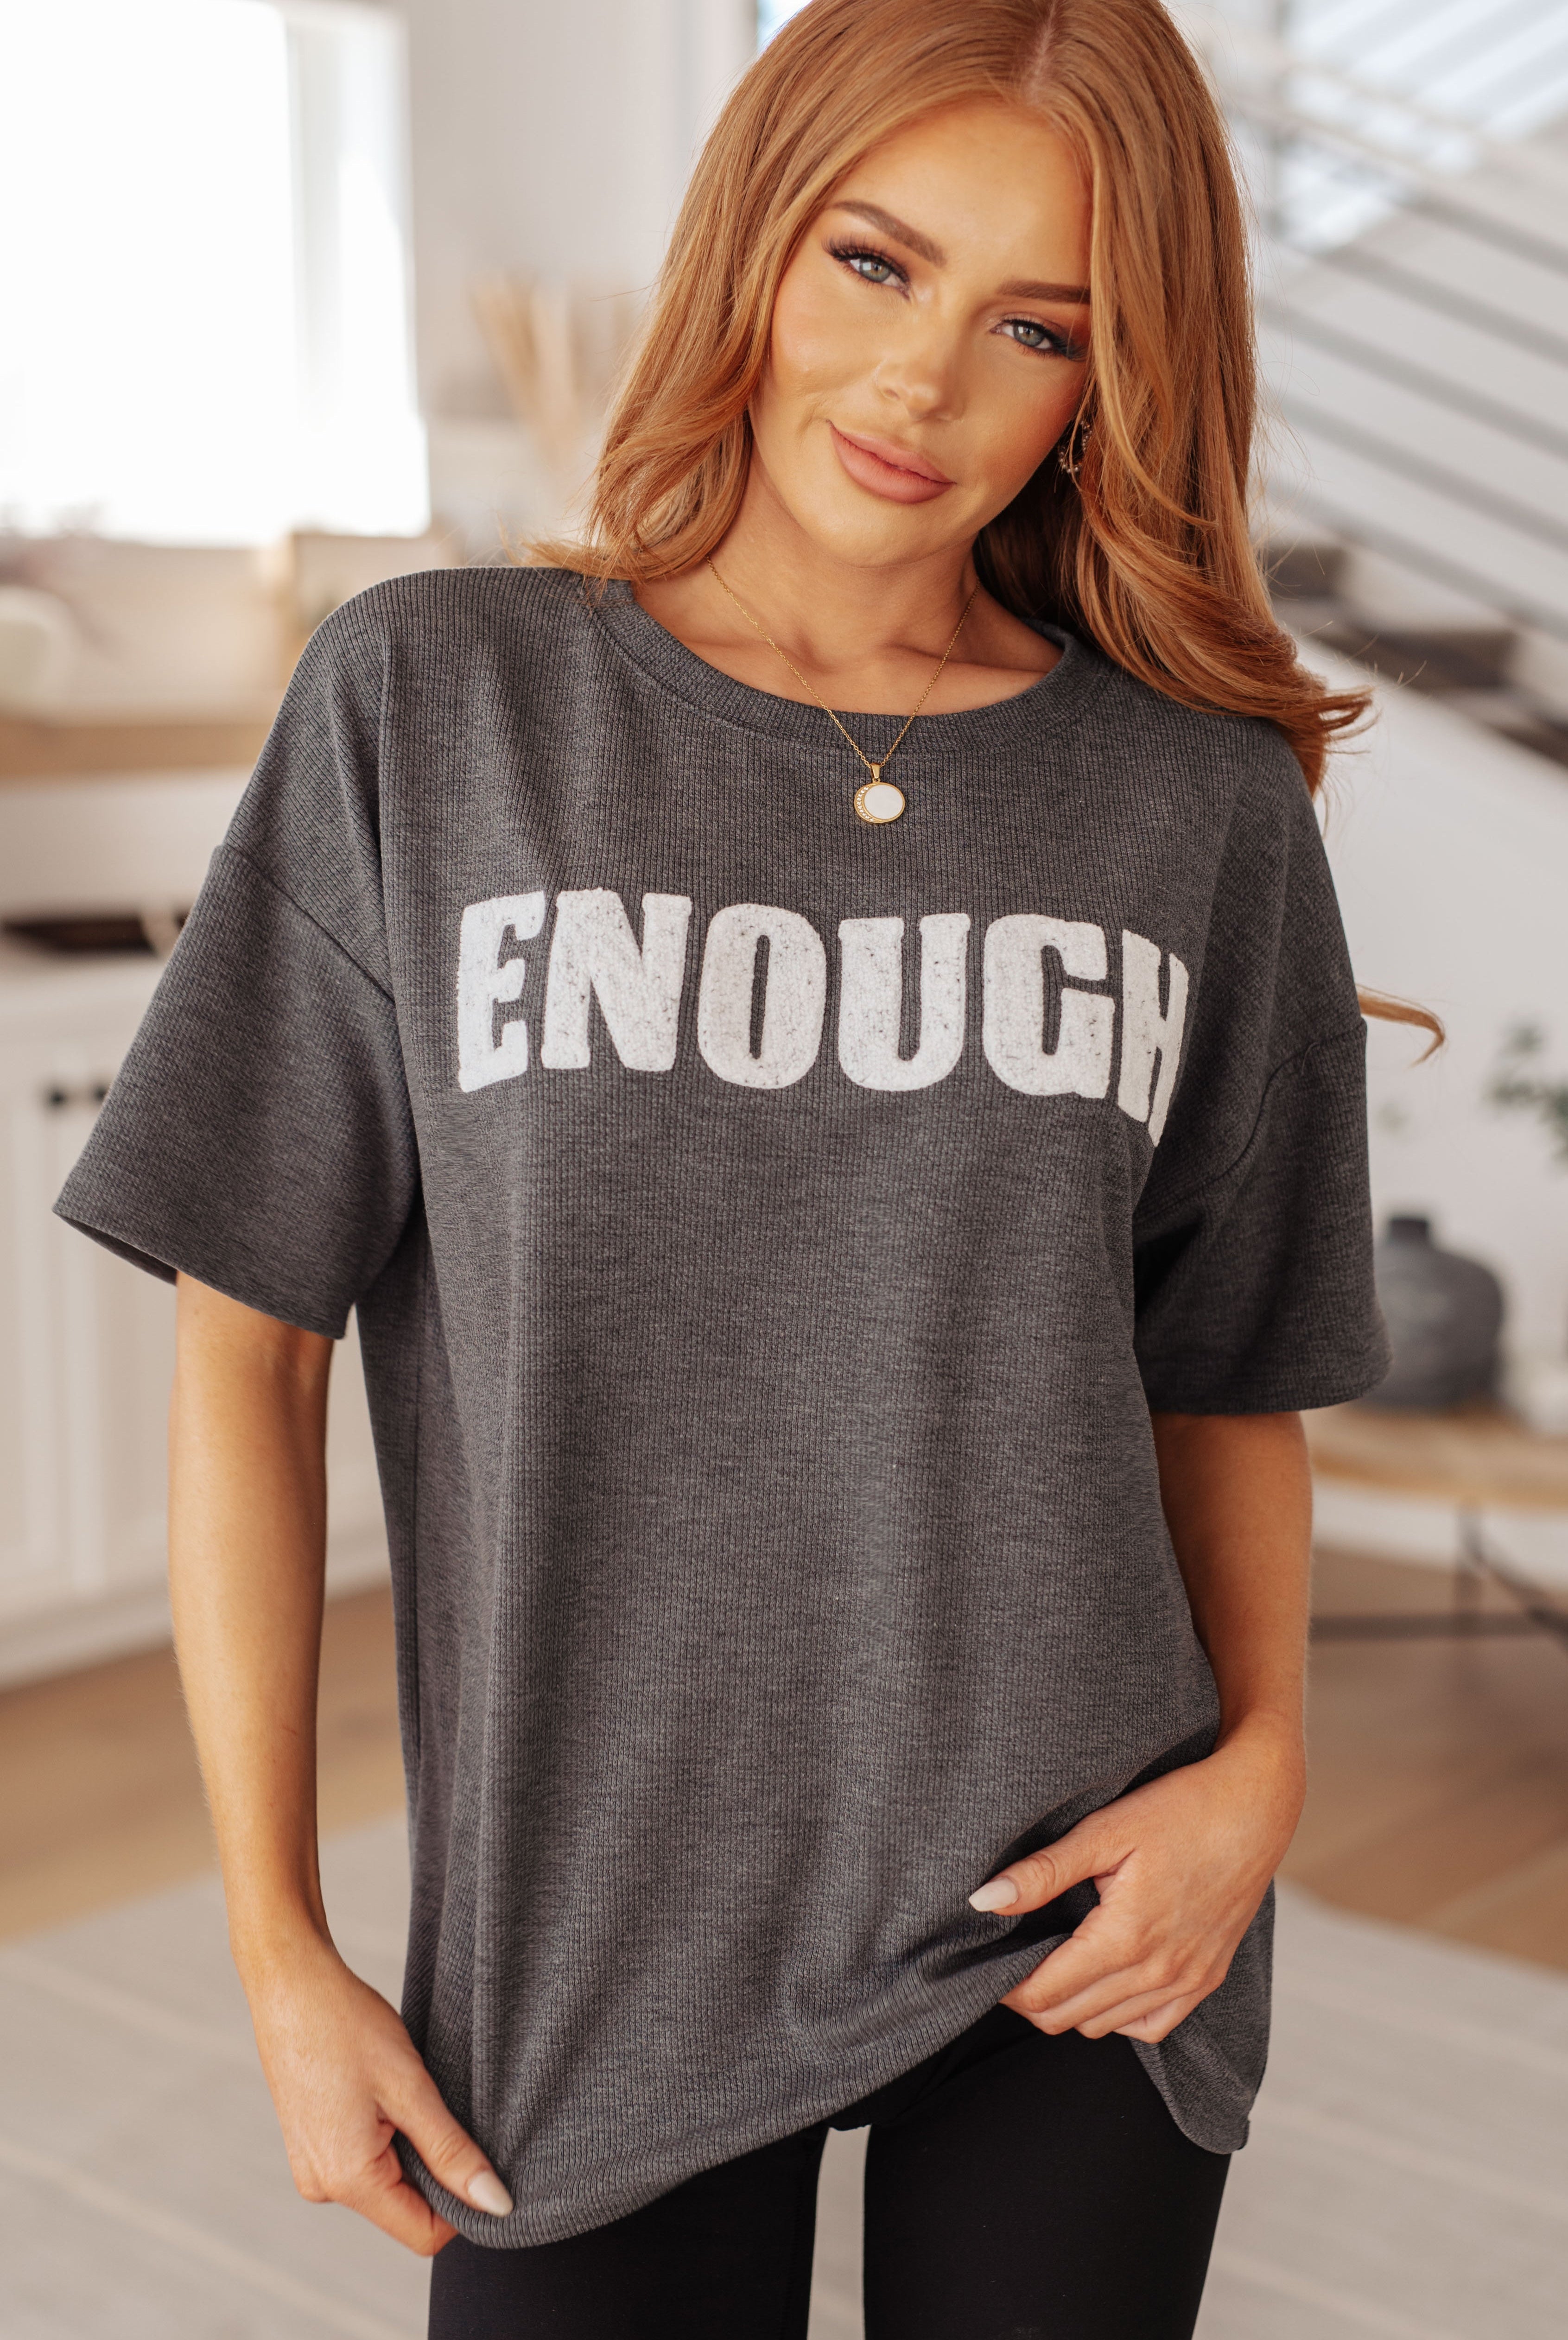 Always Enough Graphic Tee in Charcoal-Graphic Tees-Ave Shops-Urban Threadz Boutique, Women's Fashion Boutique in Saugatuck, MI